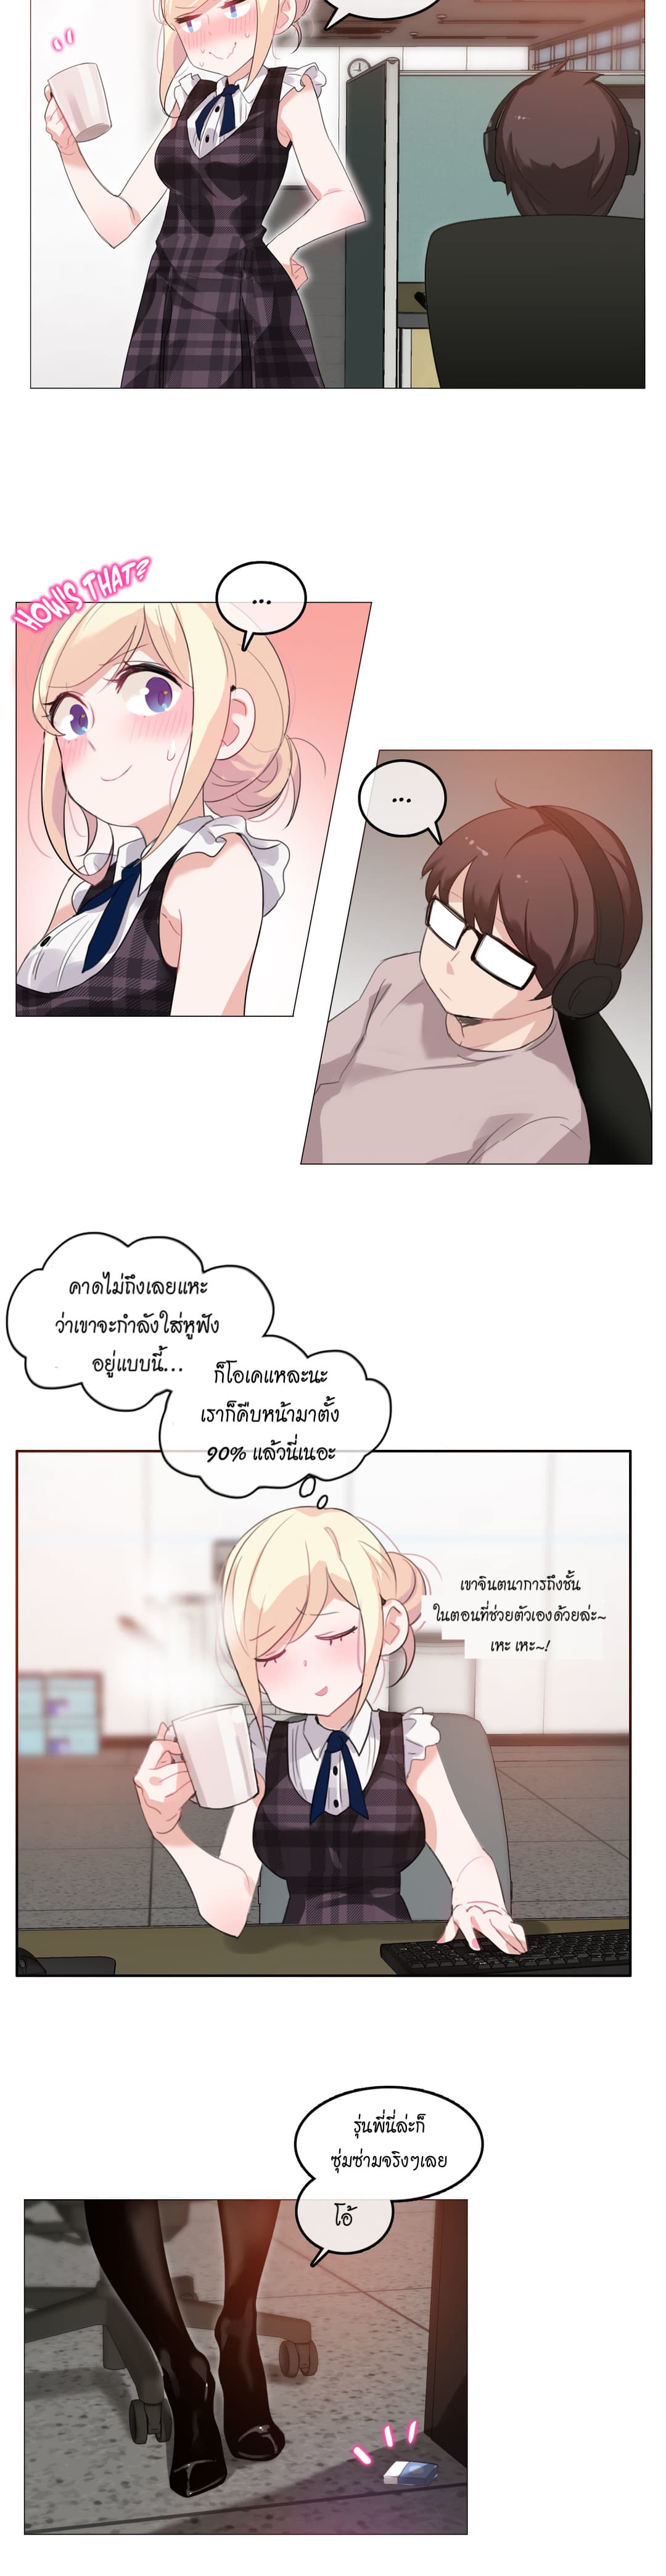 A Pervert’s Daily Life 18 (2)